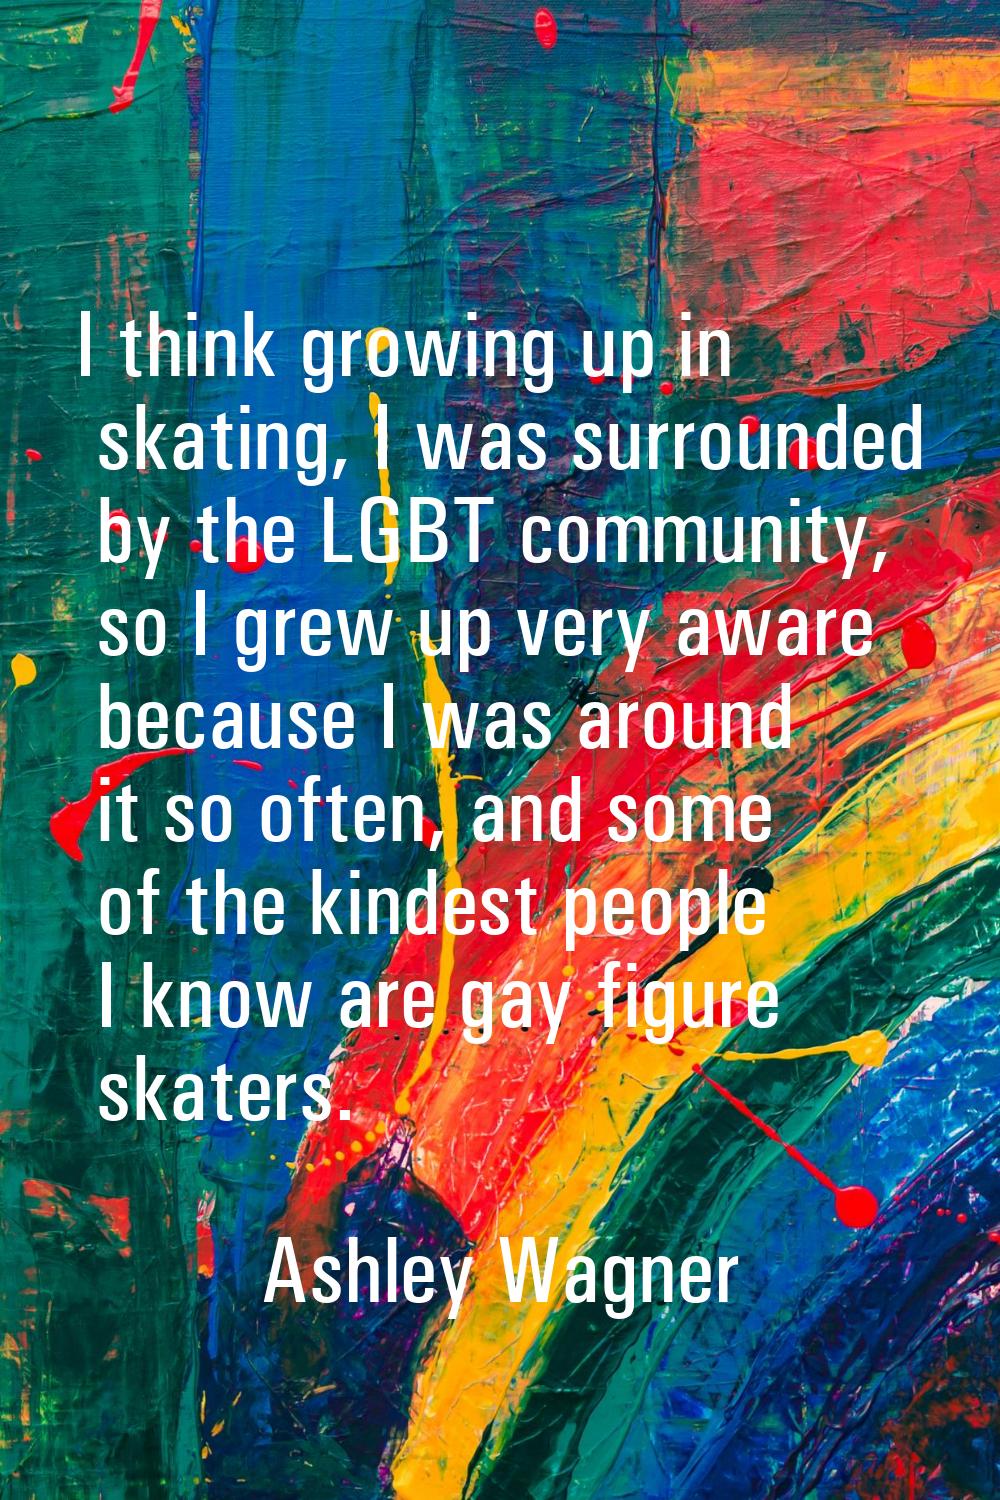 I think growing up in skating, I was surrounded by the LGBT community, so I grew up very aware beca